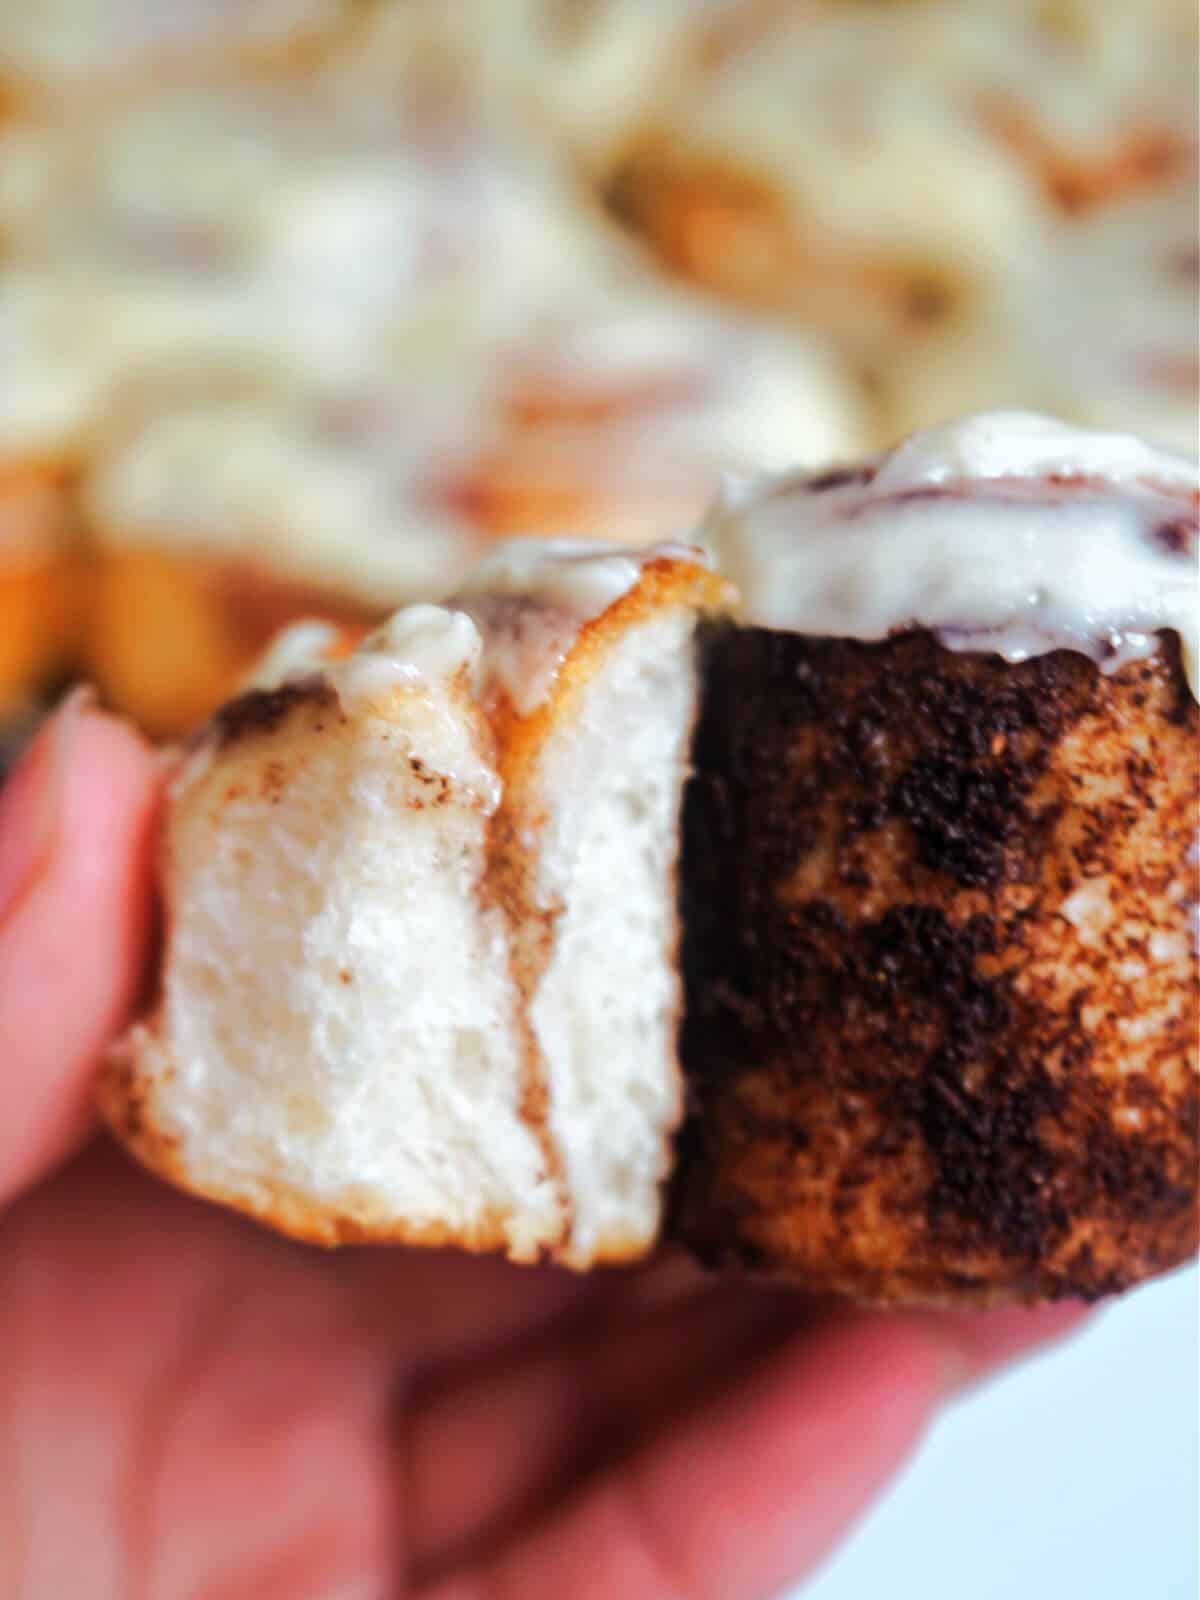 Half of a cinnamon roll to show how fluffy is inside